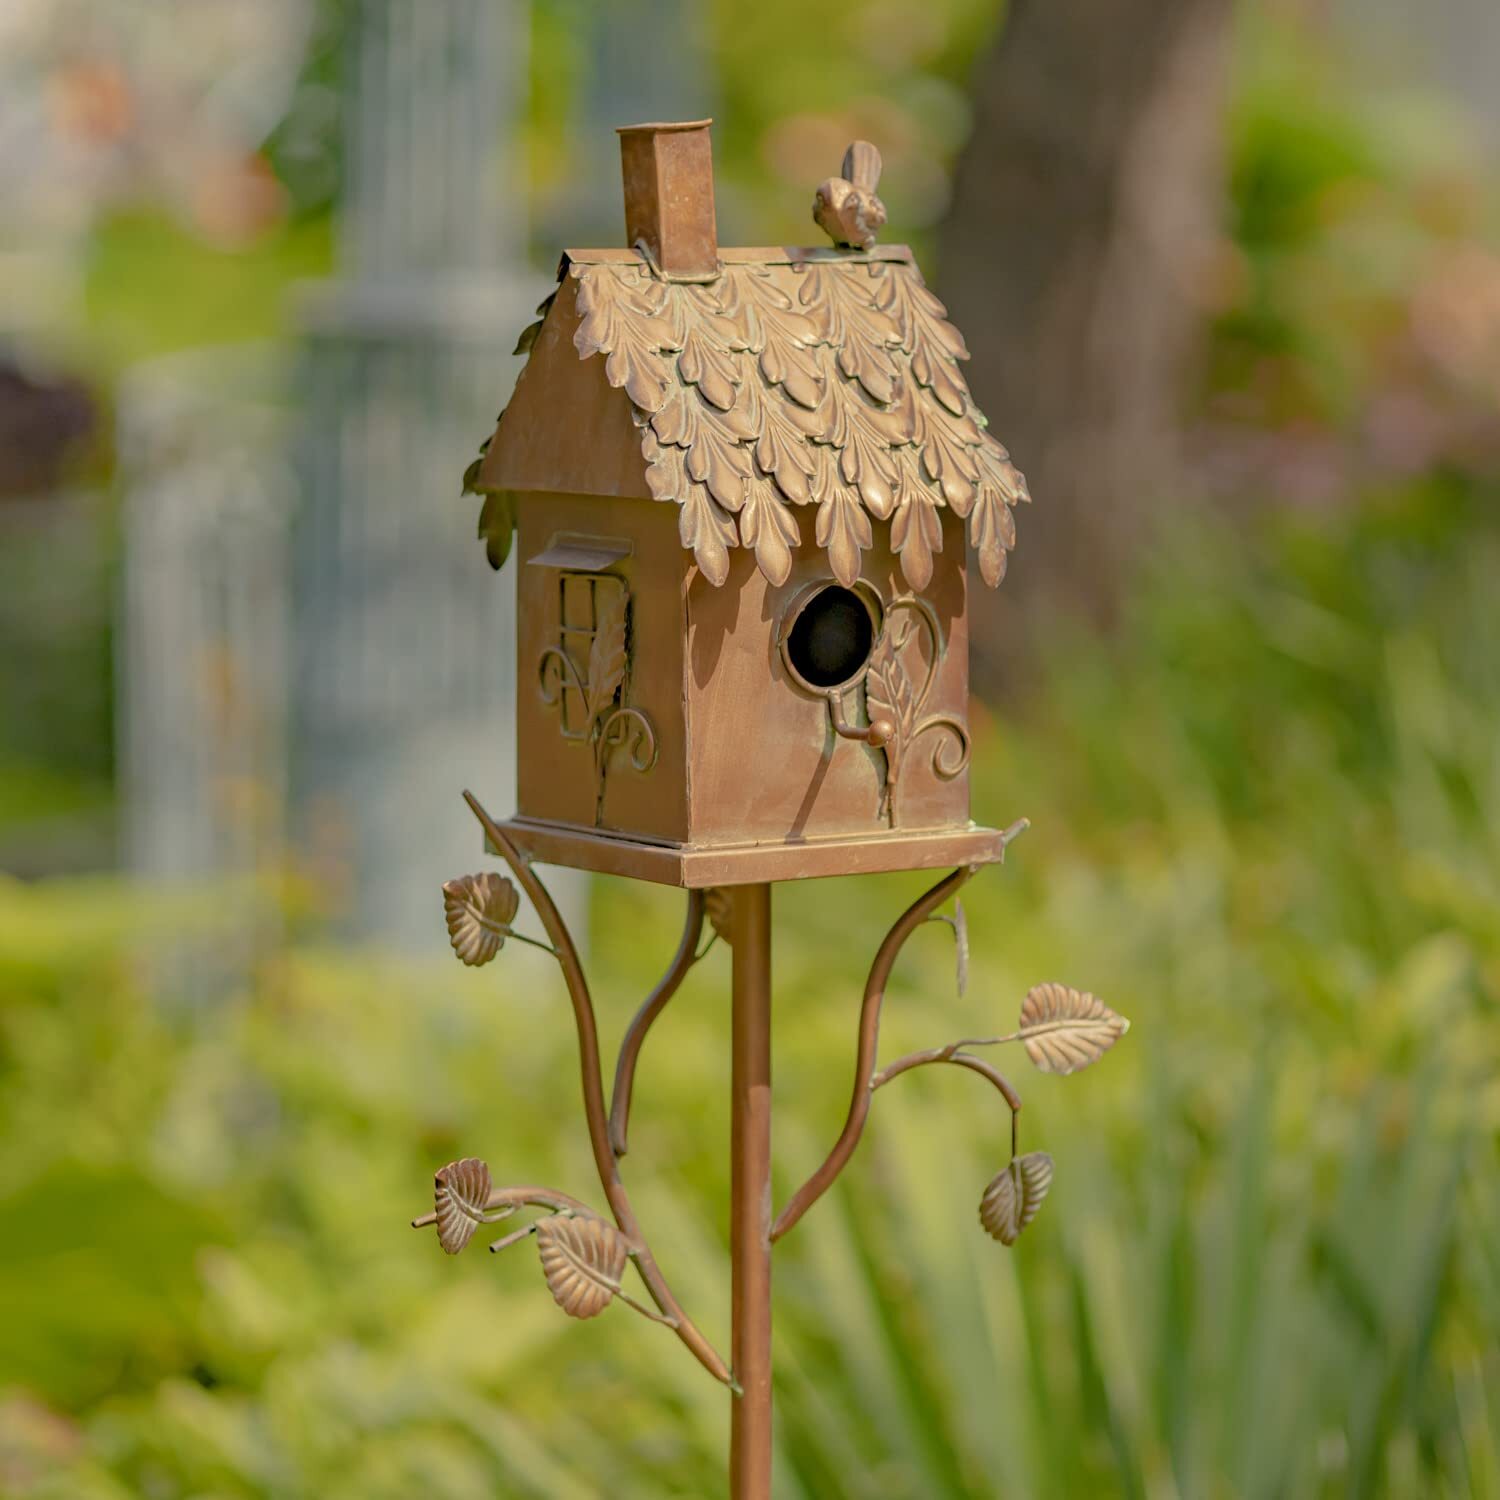 Copper Color Bird House Garden Stake with Ornate Style Roof (Rectangular)